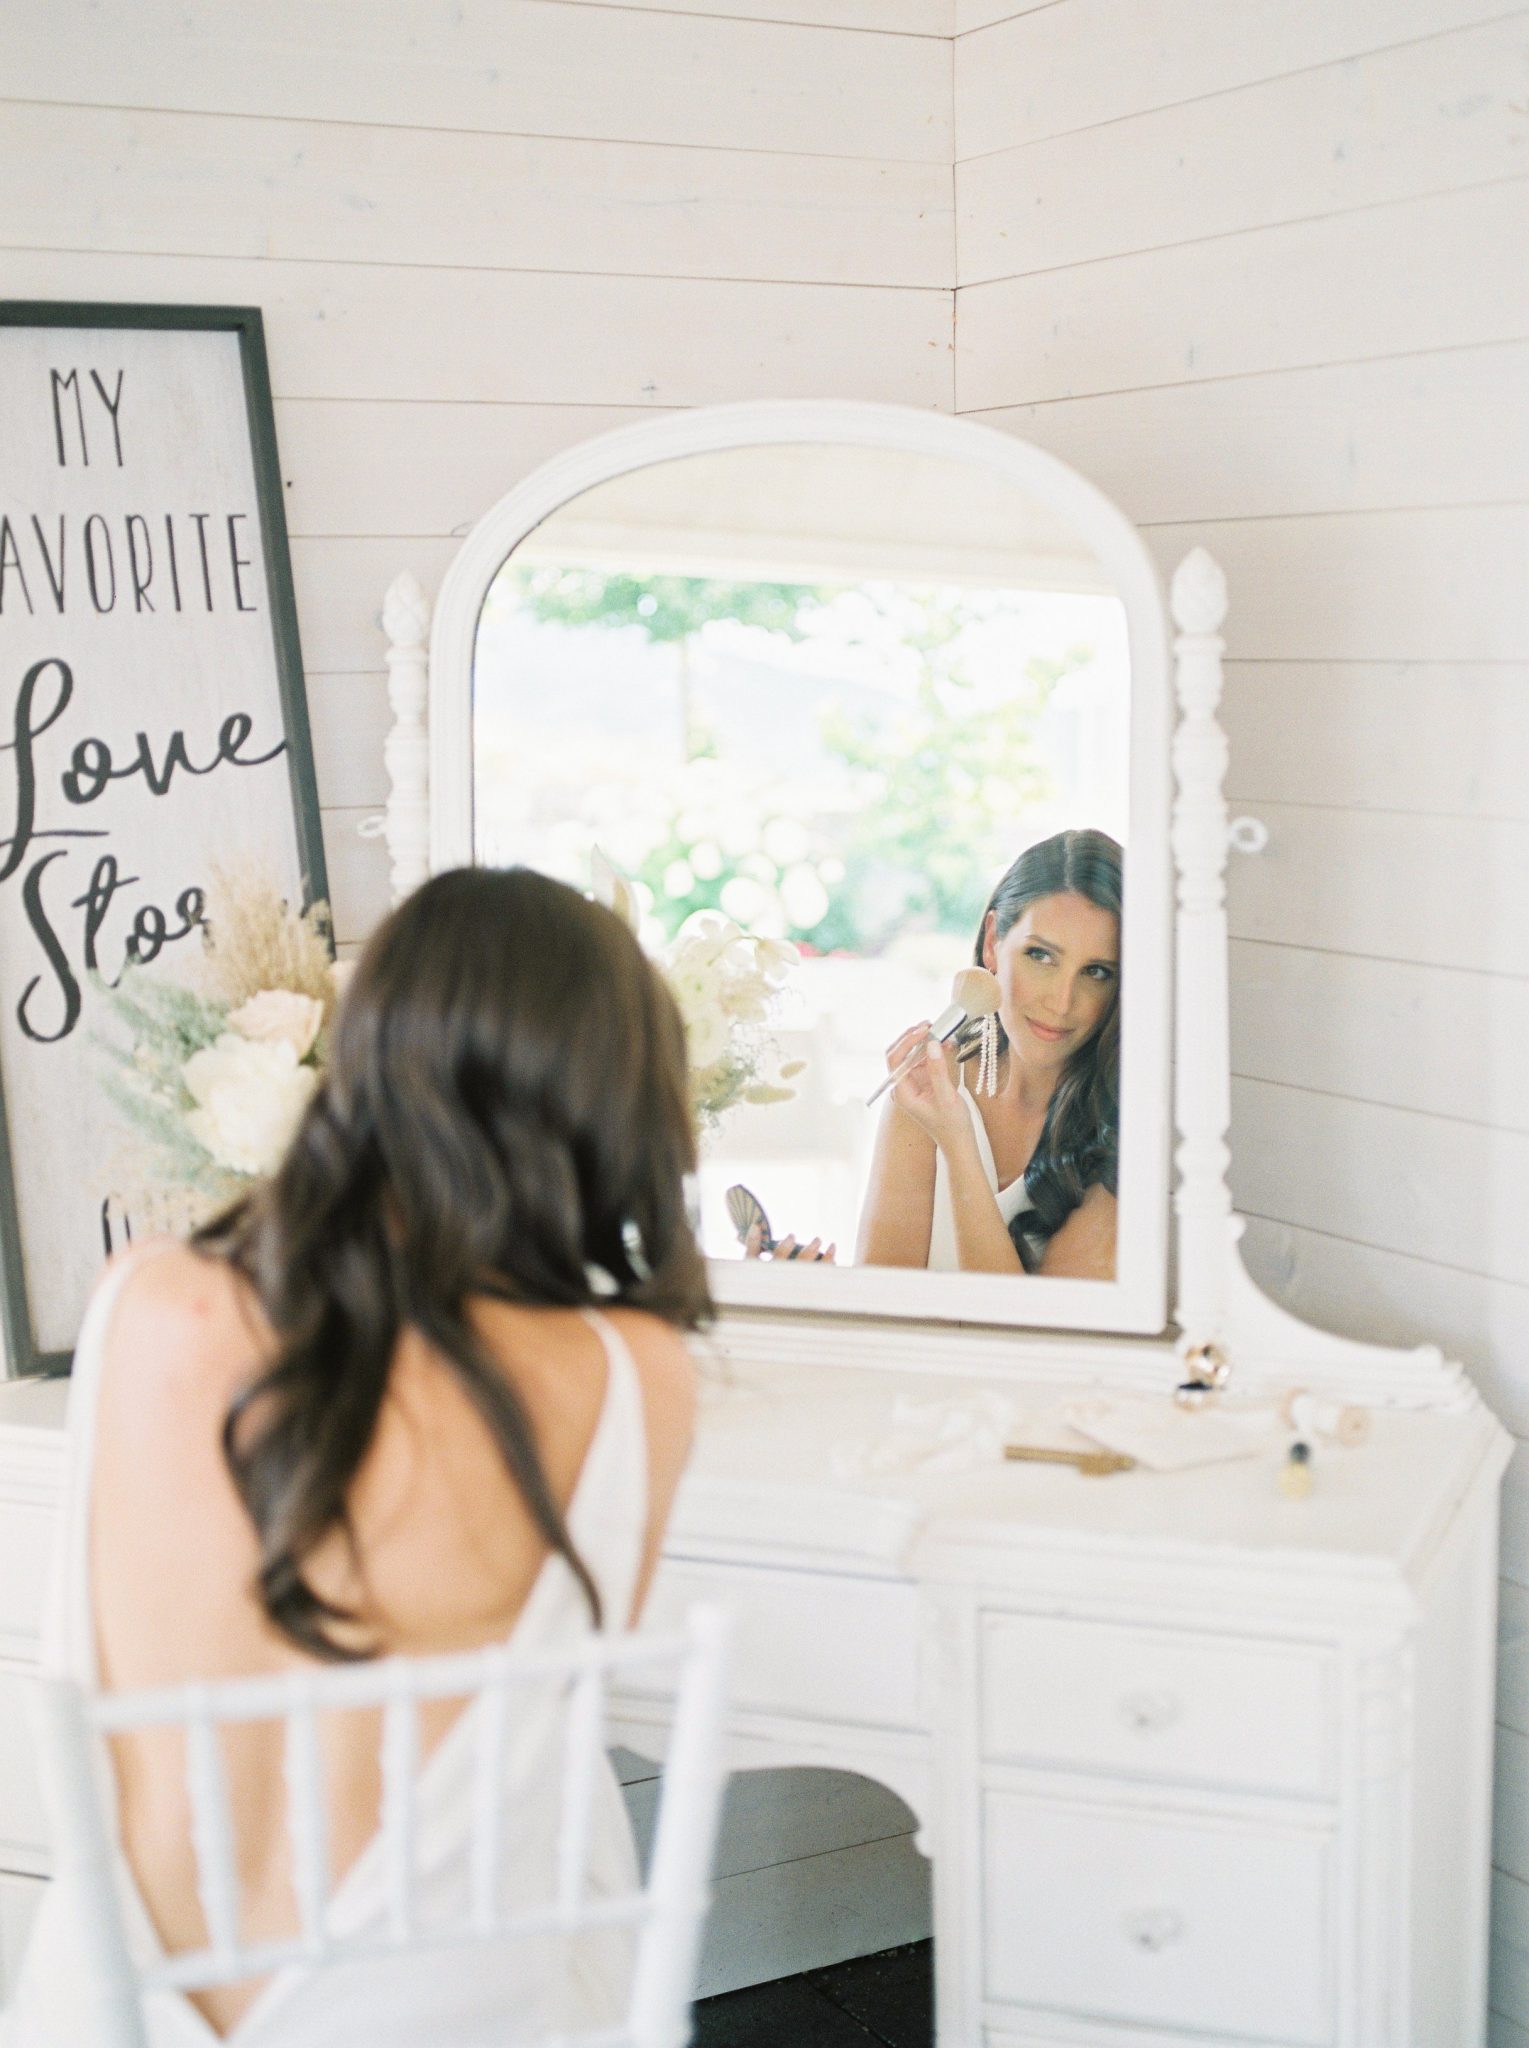 Modern Okanagan bride applies makeup seated in front of a white vanity